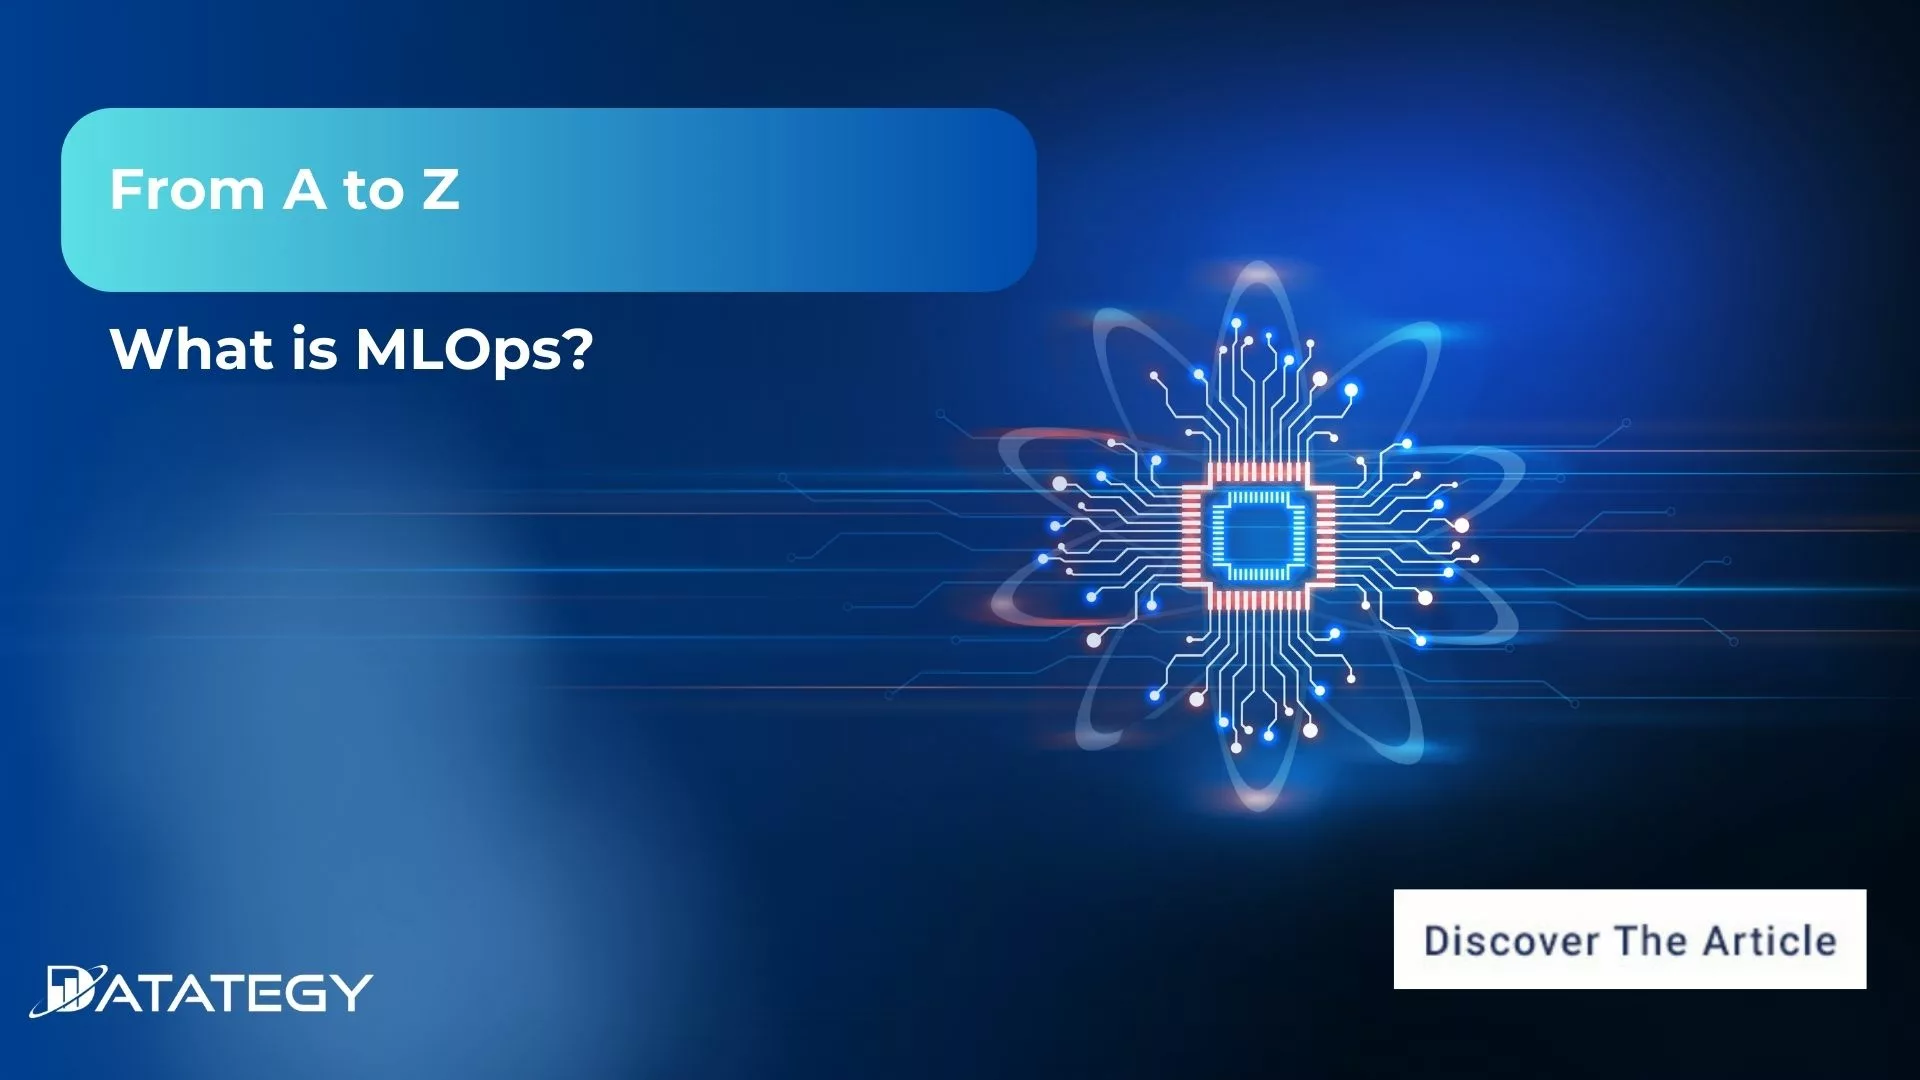 What is mlops?